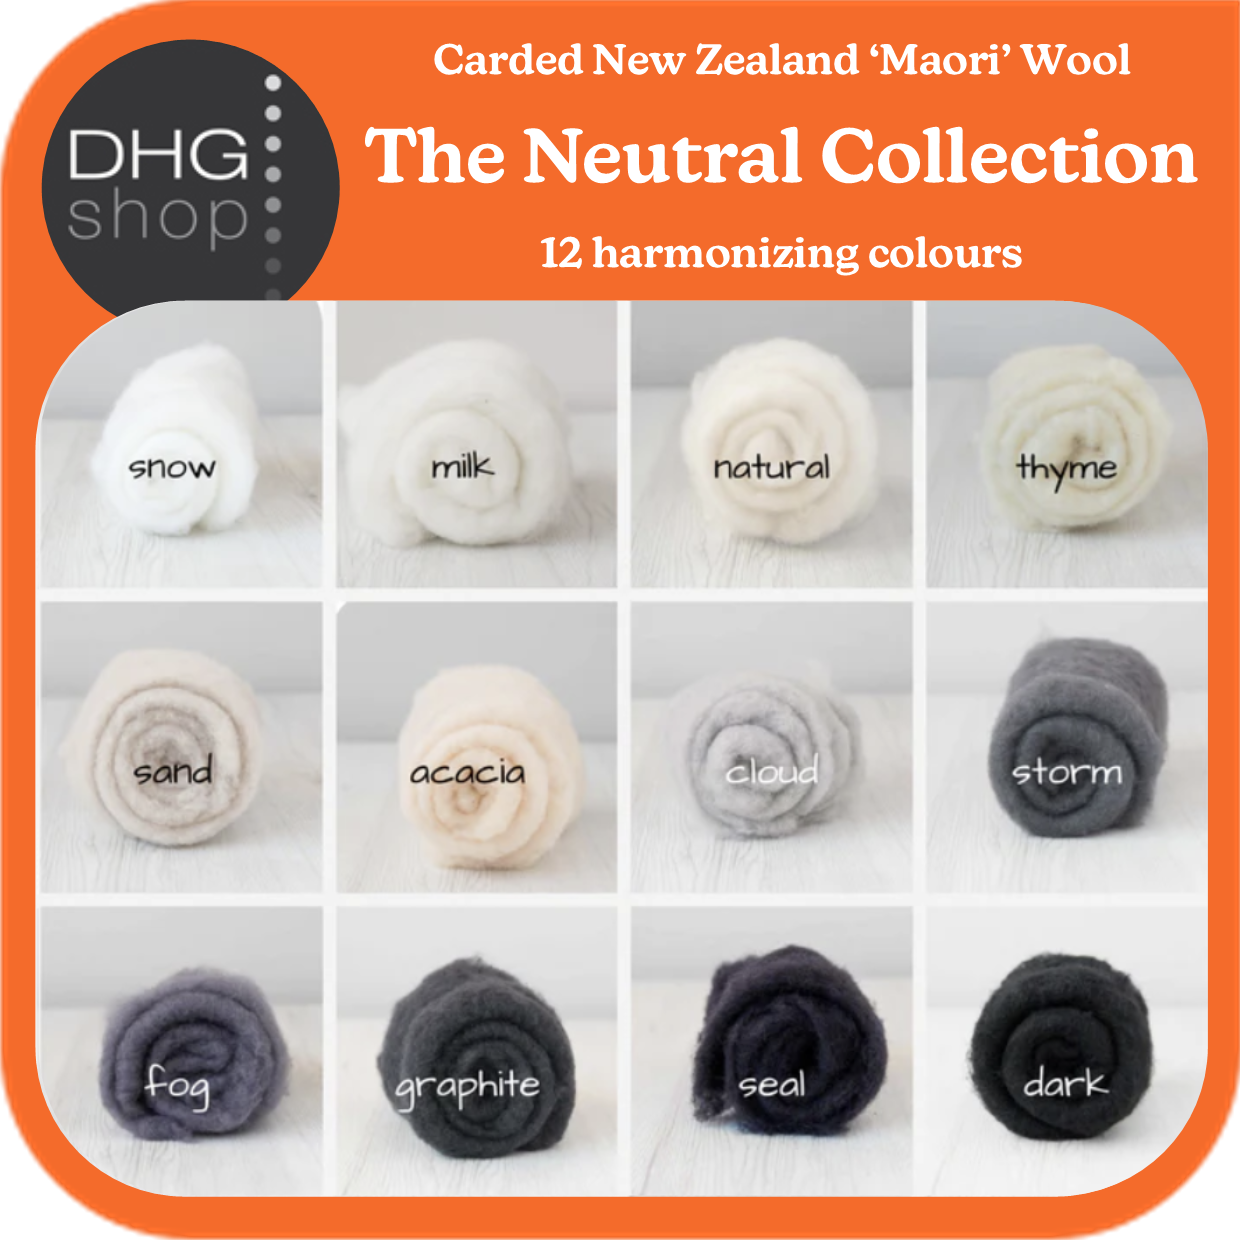 The Neutral Collection - Carded New Zealand Wool DHG 'Maori' Batts